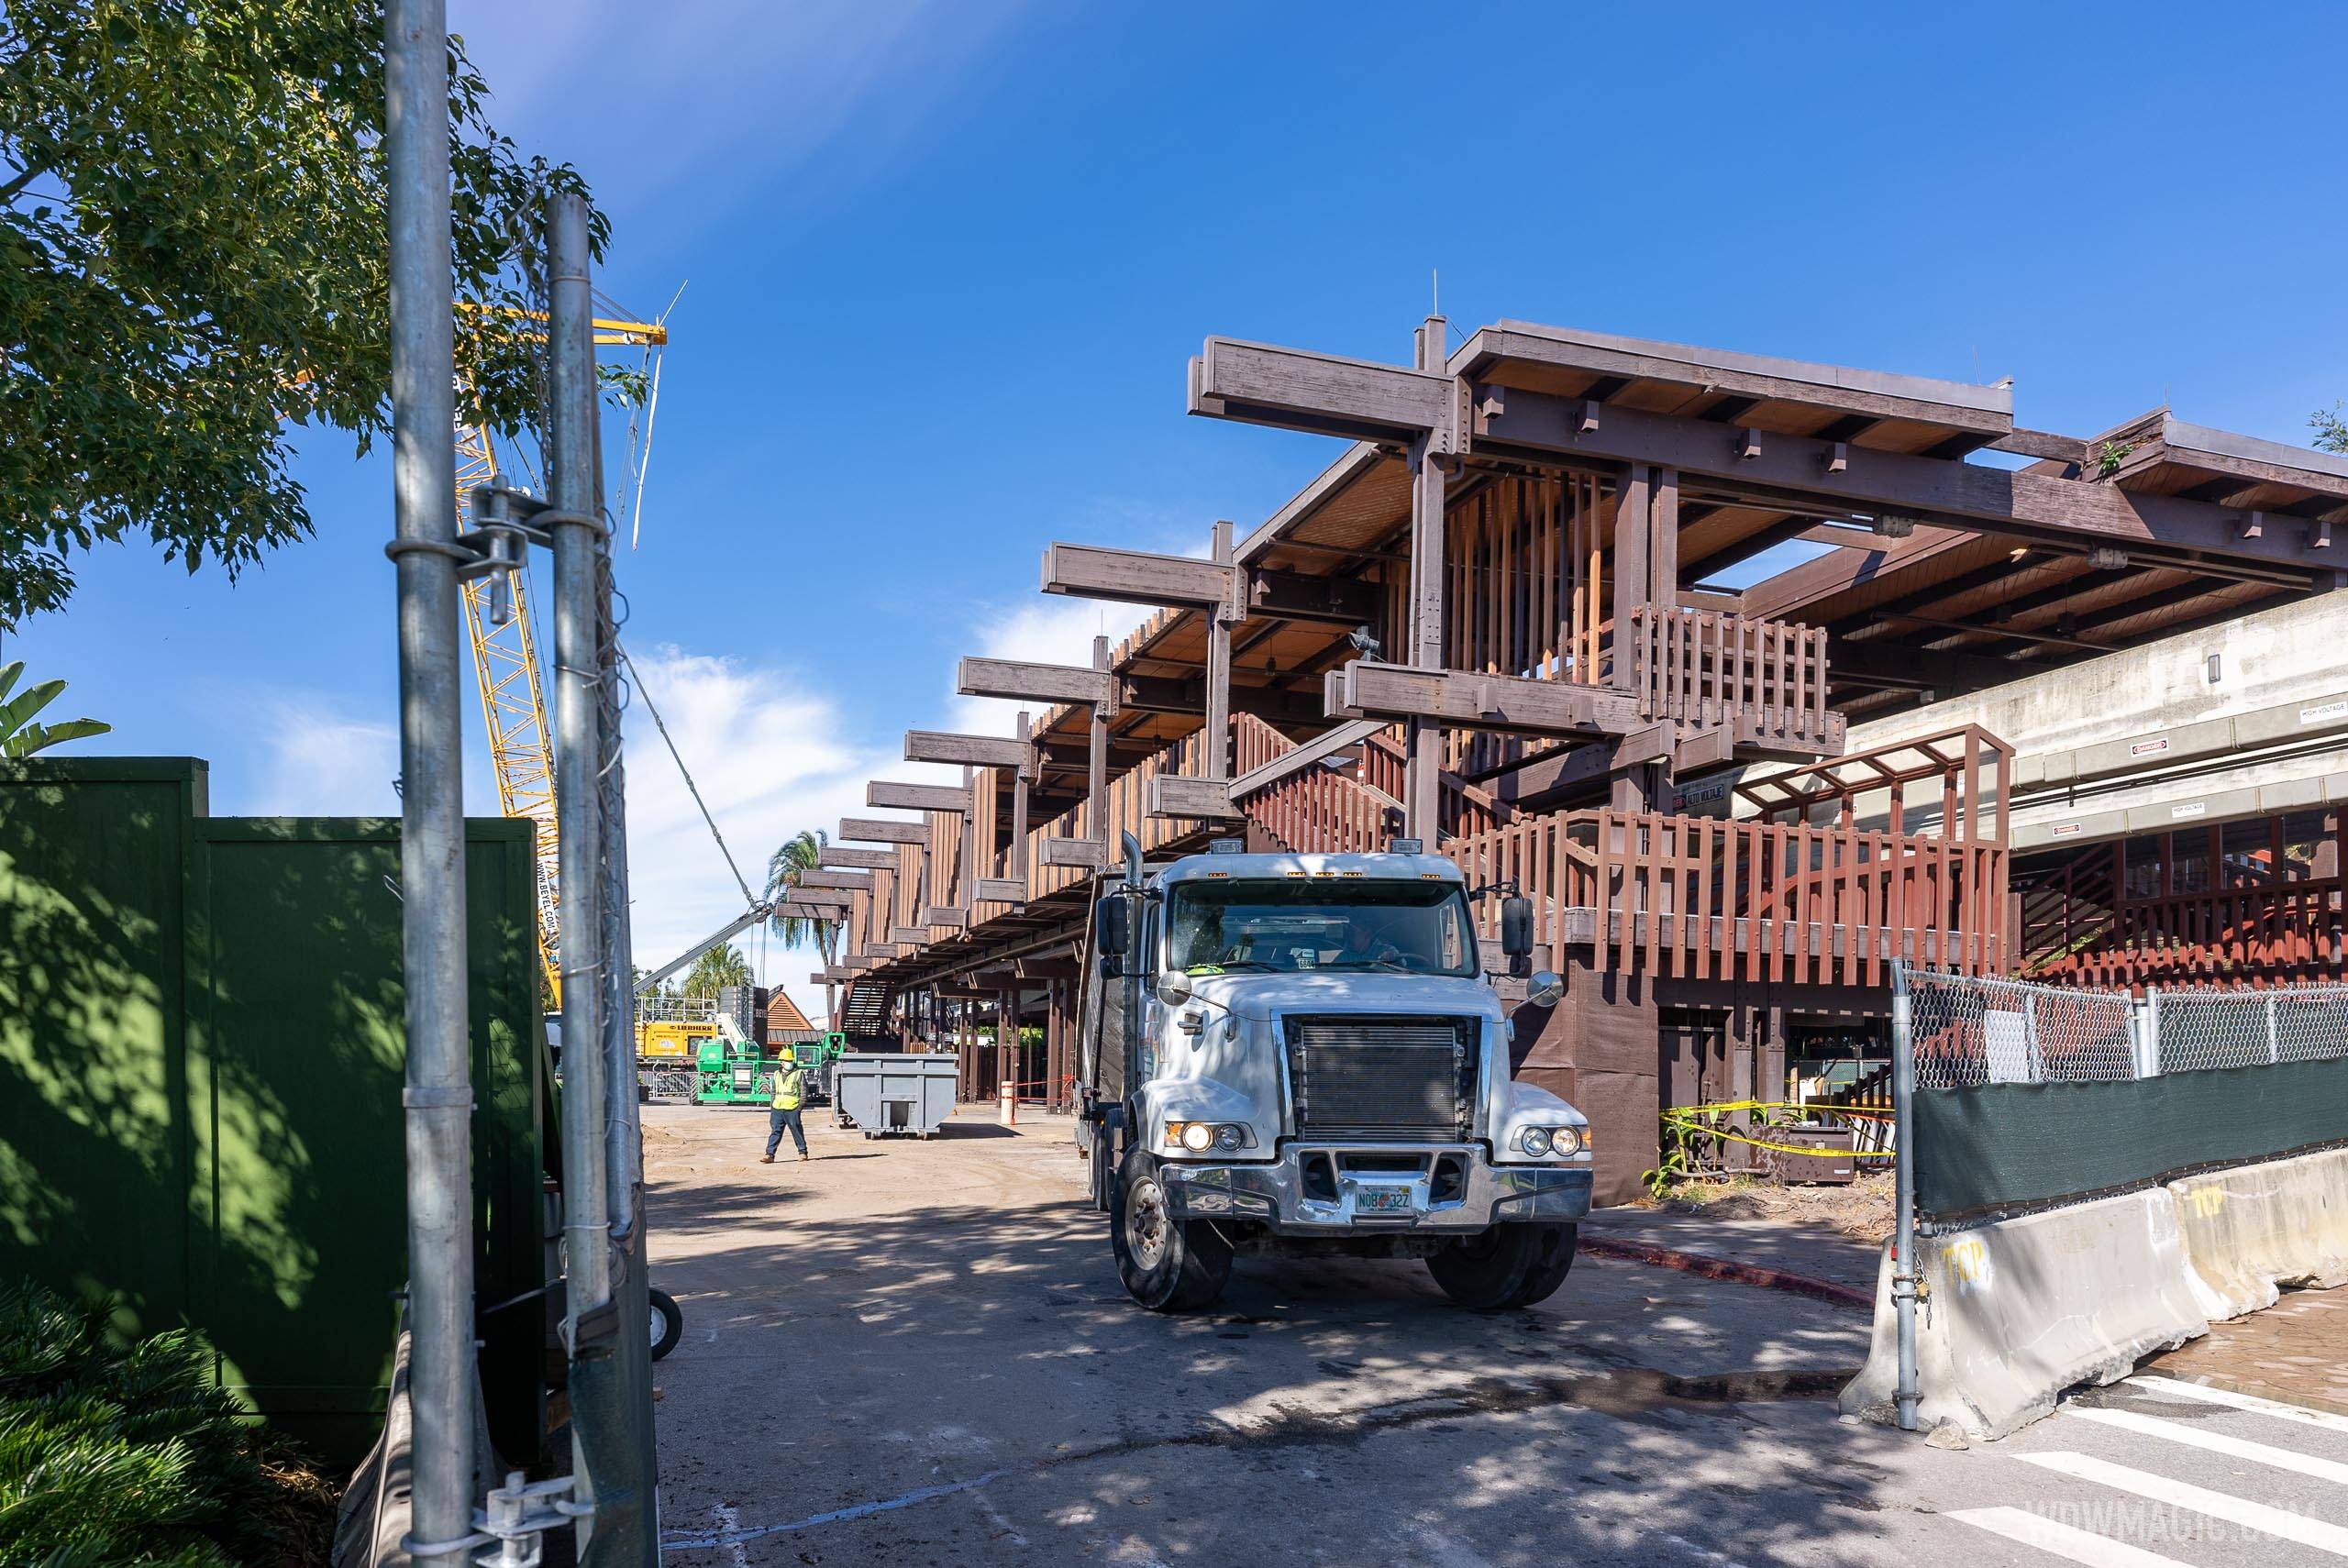 PHOTOS - Construction update from the Great Ceremonial House at Disney's Polynesian Resort